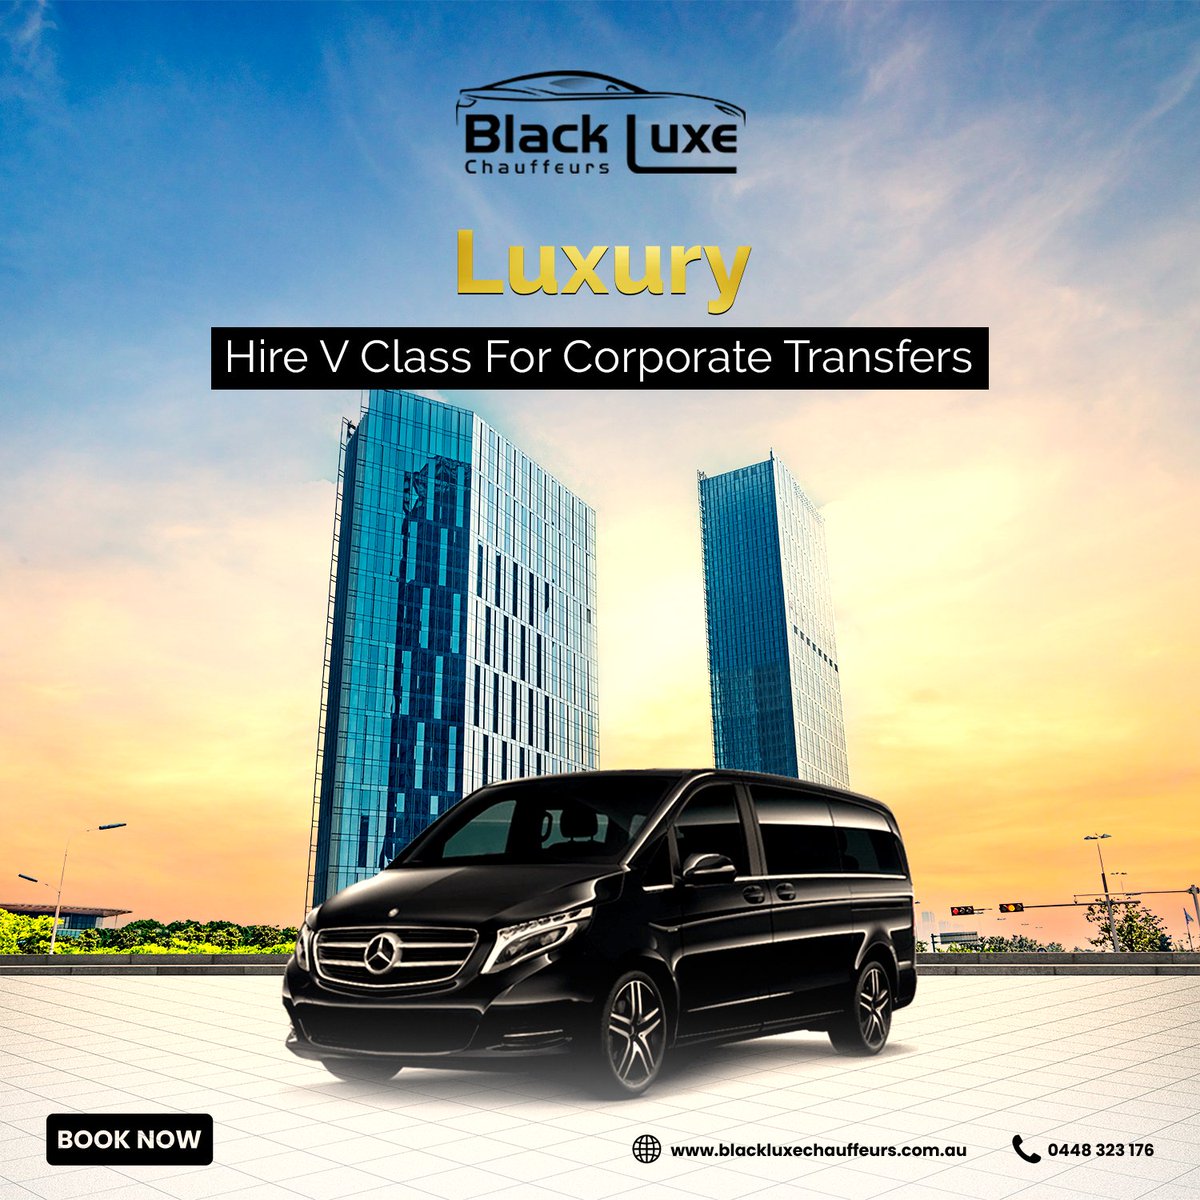 Hire Luxury Mercedes V Class For Corporate Transfers in Brisbane & GoldCoast.

Book Now: blackluxechauffeurs.com.au
.
.
.
.
.
.
.
.
.
#luxurytransfers #corporatetravel #CorporateTransfers #corporateevents #brisbane #goldcoast